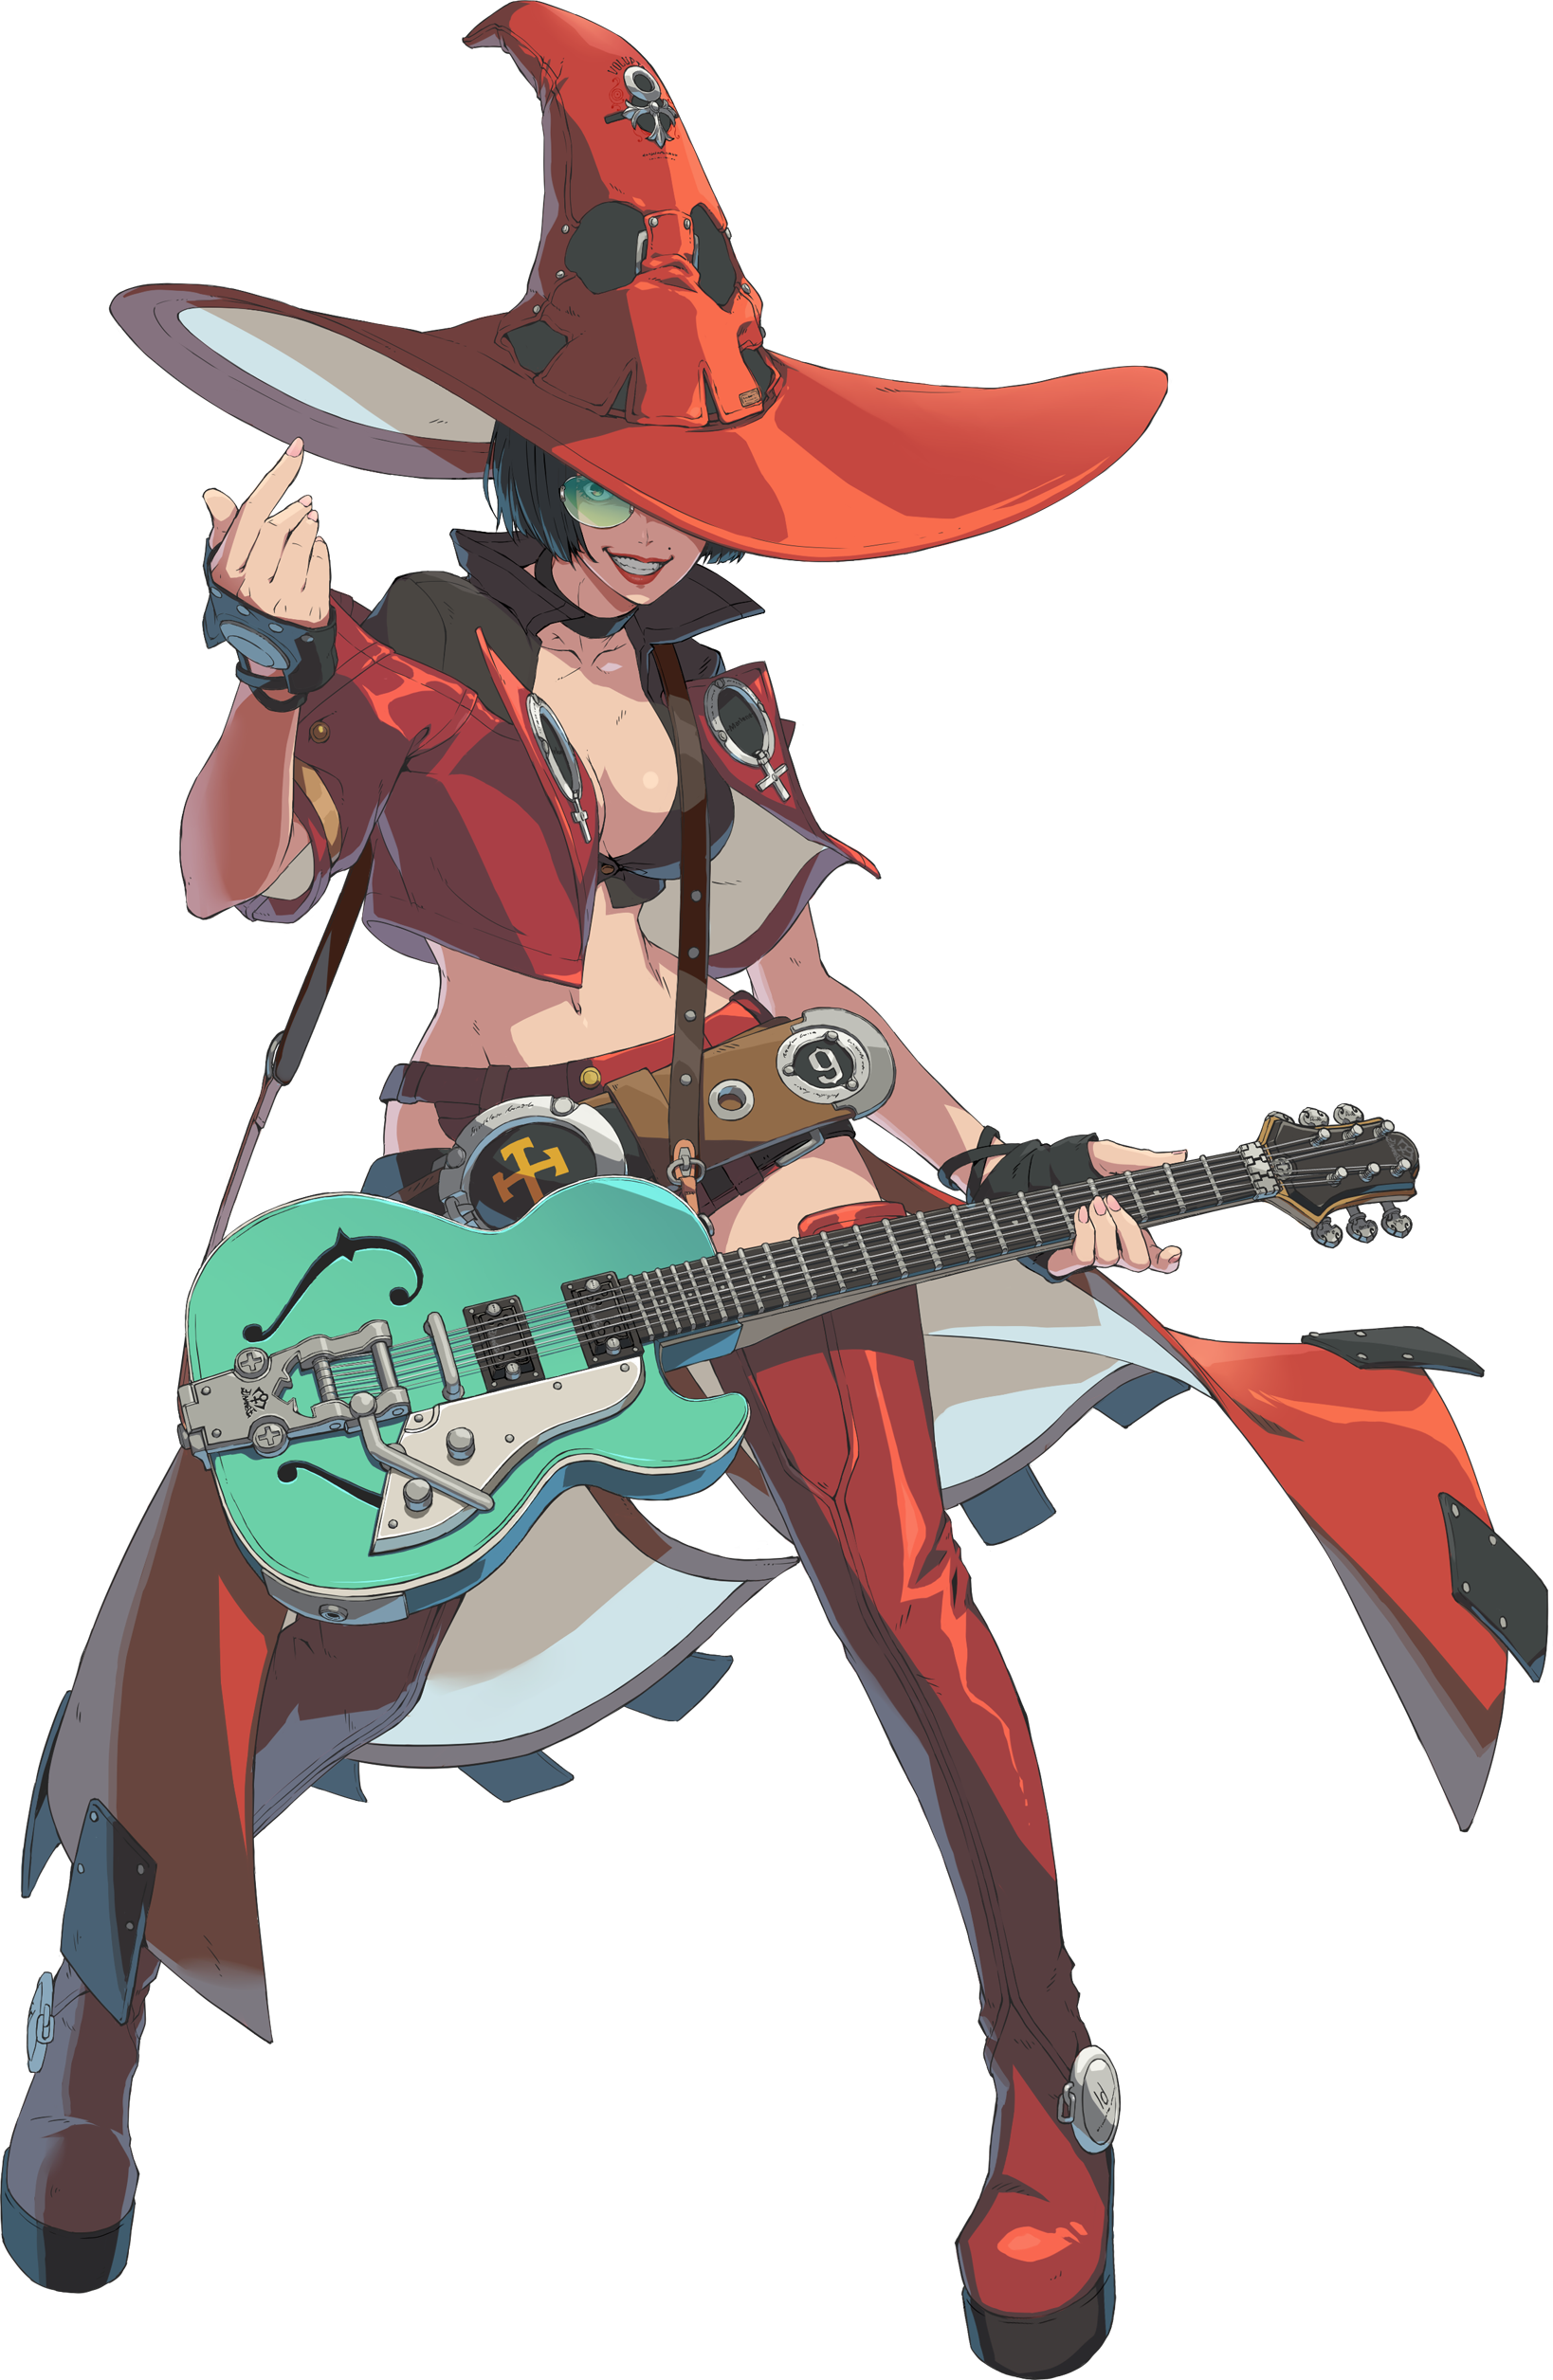 Don't know much about Guilty Gear but I like Bridget's design! : r/ Guiltygear